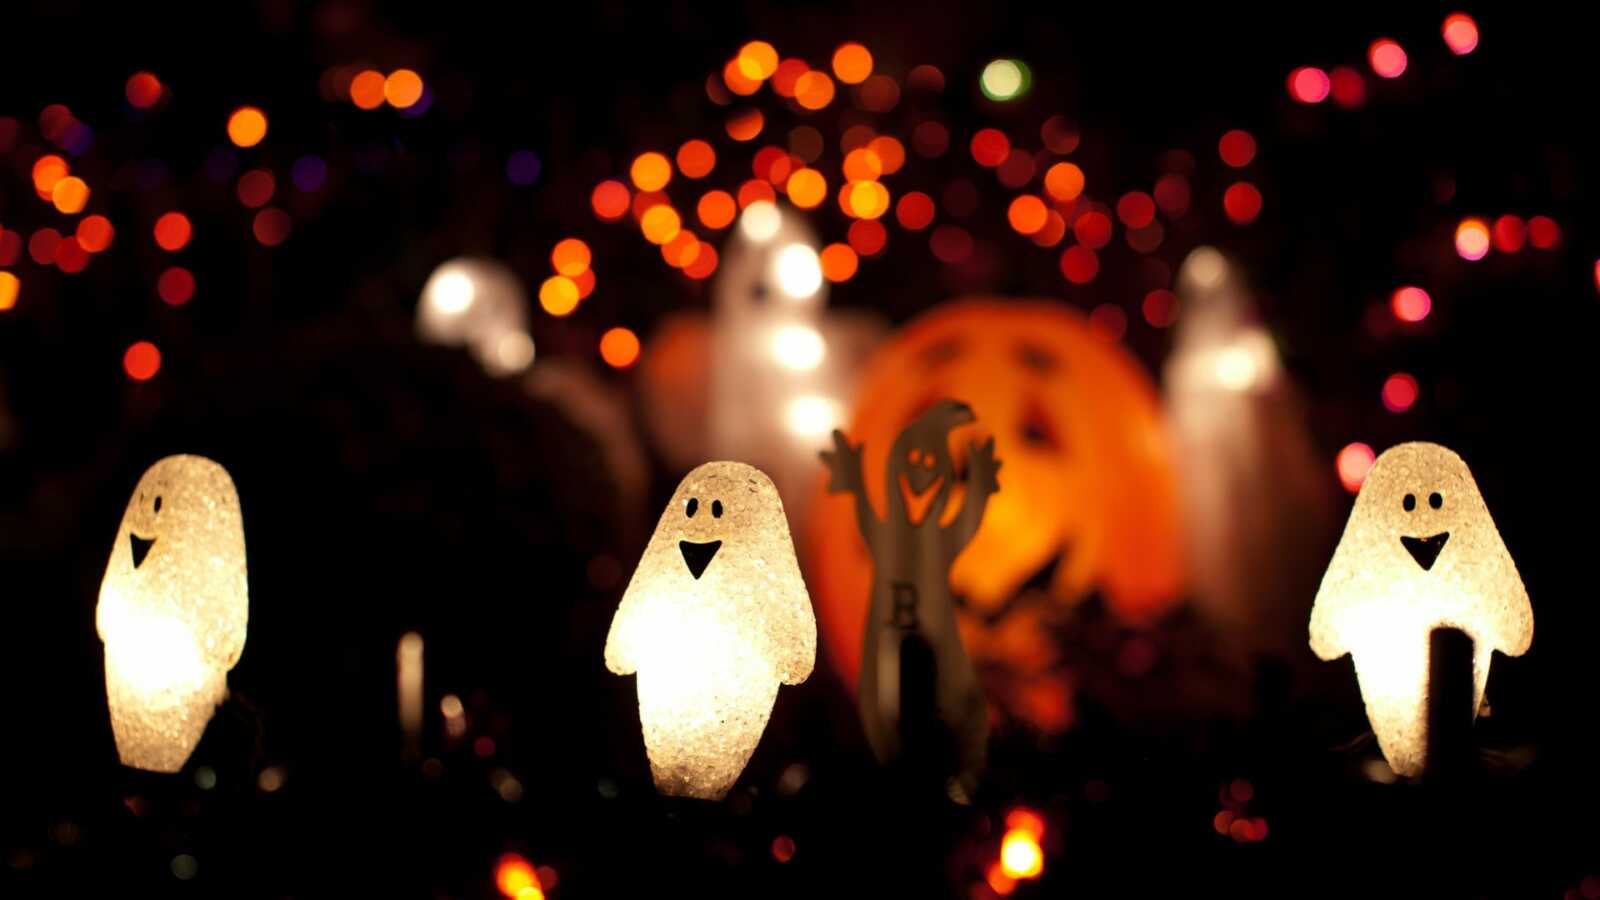 Halloween lawn decorations and lights at night